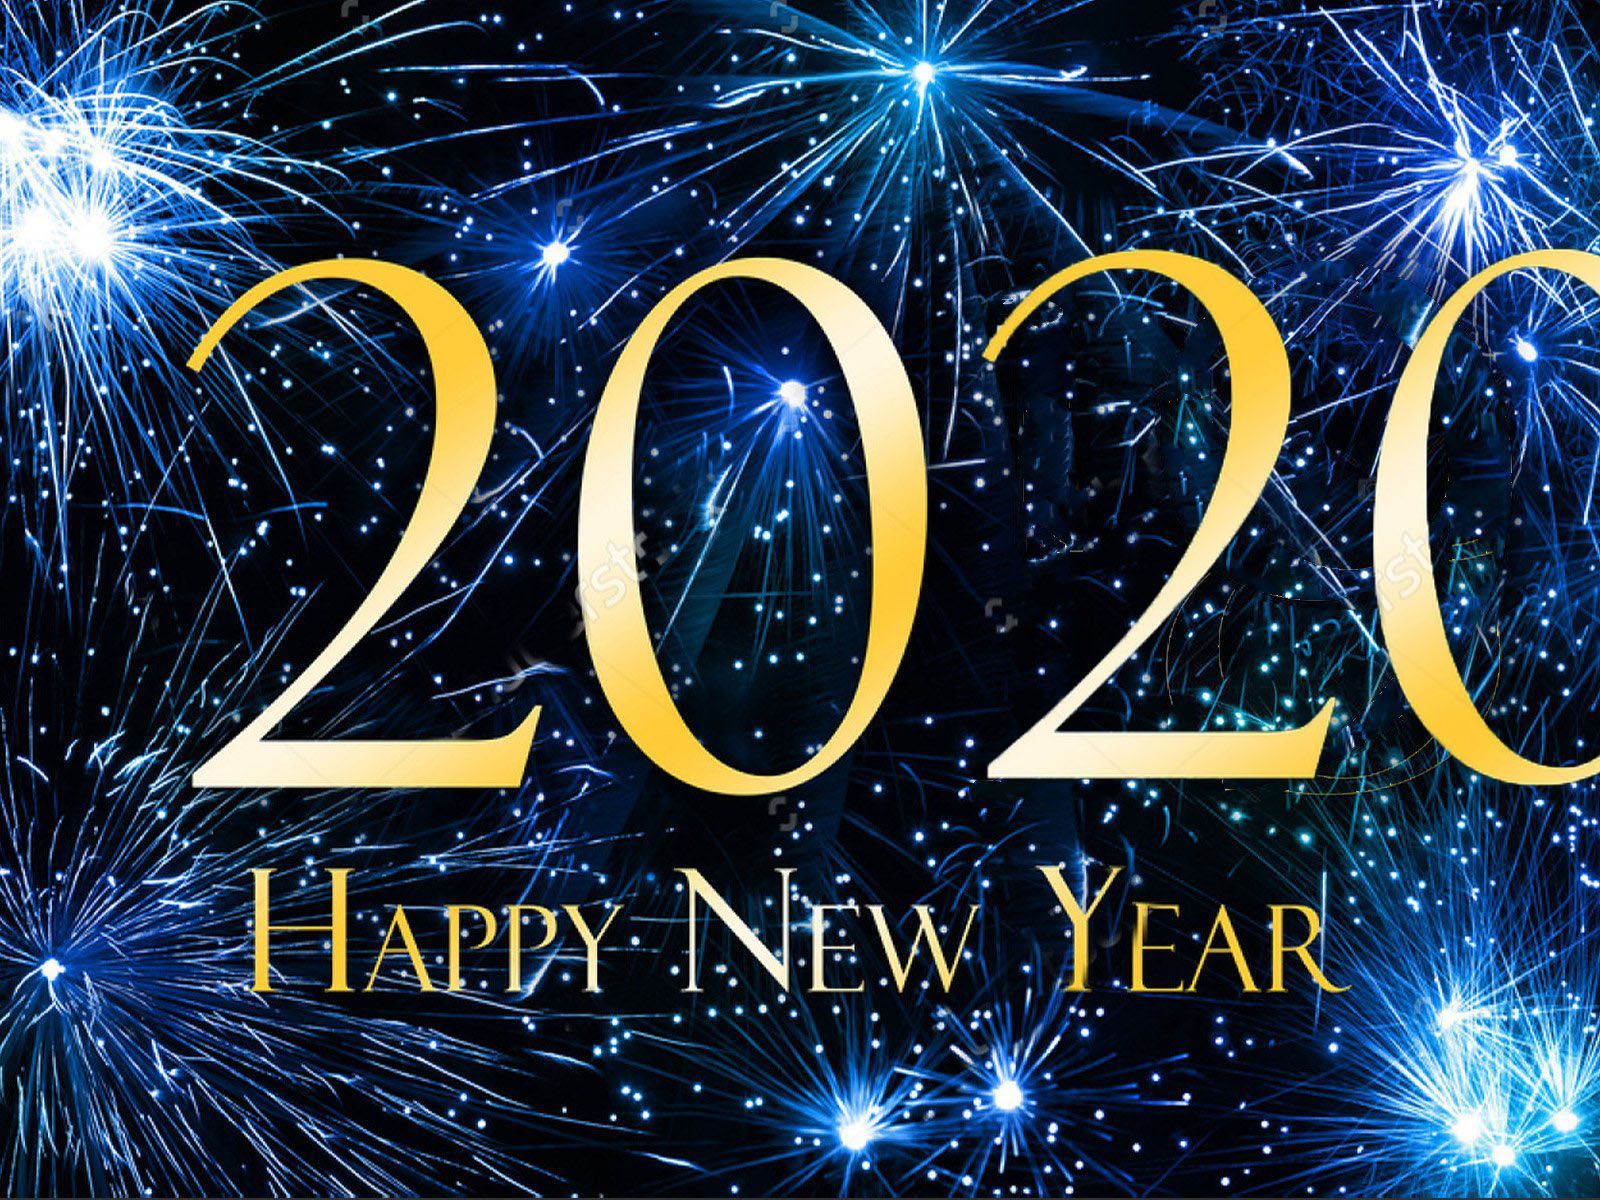 Happy New Year 2020 Blue HD Wallpaper For Laptop And Tablet Free Download 1920x1200, Wallpaper13.com